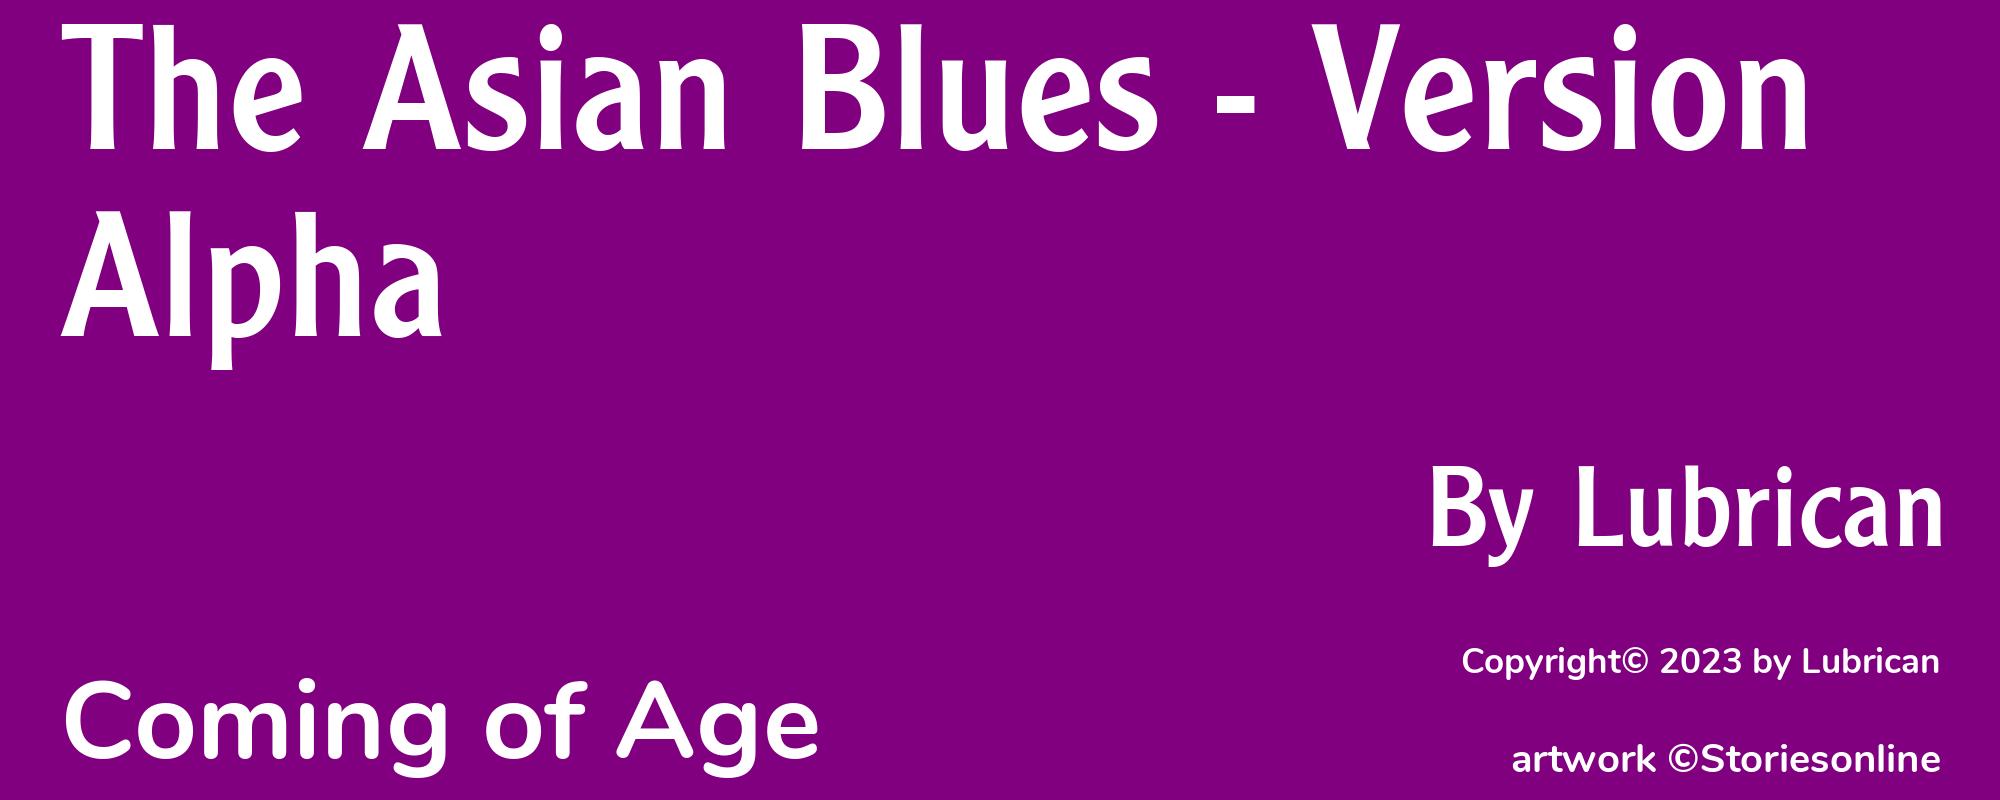 The Asian Blues - Version Alpha - Cover